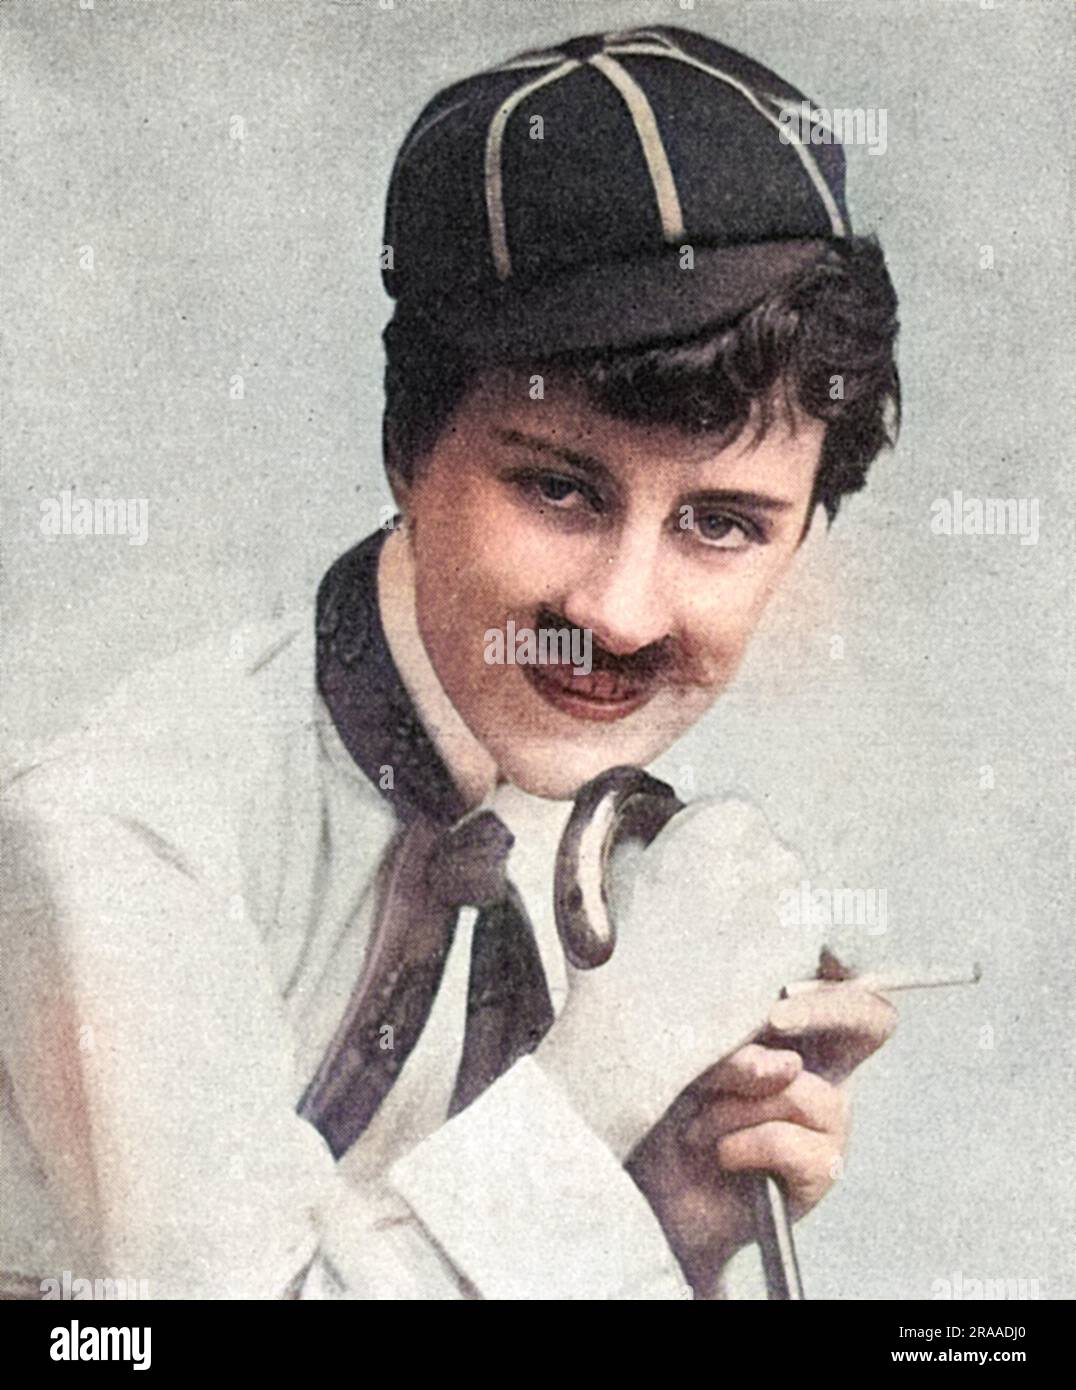 Beatrice Lillie (1894 - 1989) British actress, later Lady Peel after she married Robert ('Bobbie') Peel, who succeeded to his father's baronetcy in 1925.  Pictured early in her career dressed up as Charlie Chaplin, the 'Cinema King' in the new Vaudeville revue, Tabs.     Date: 1918 Stock Photo